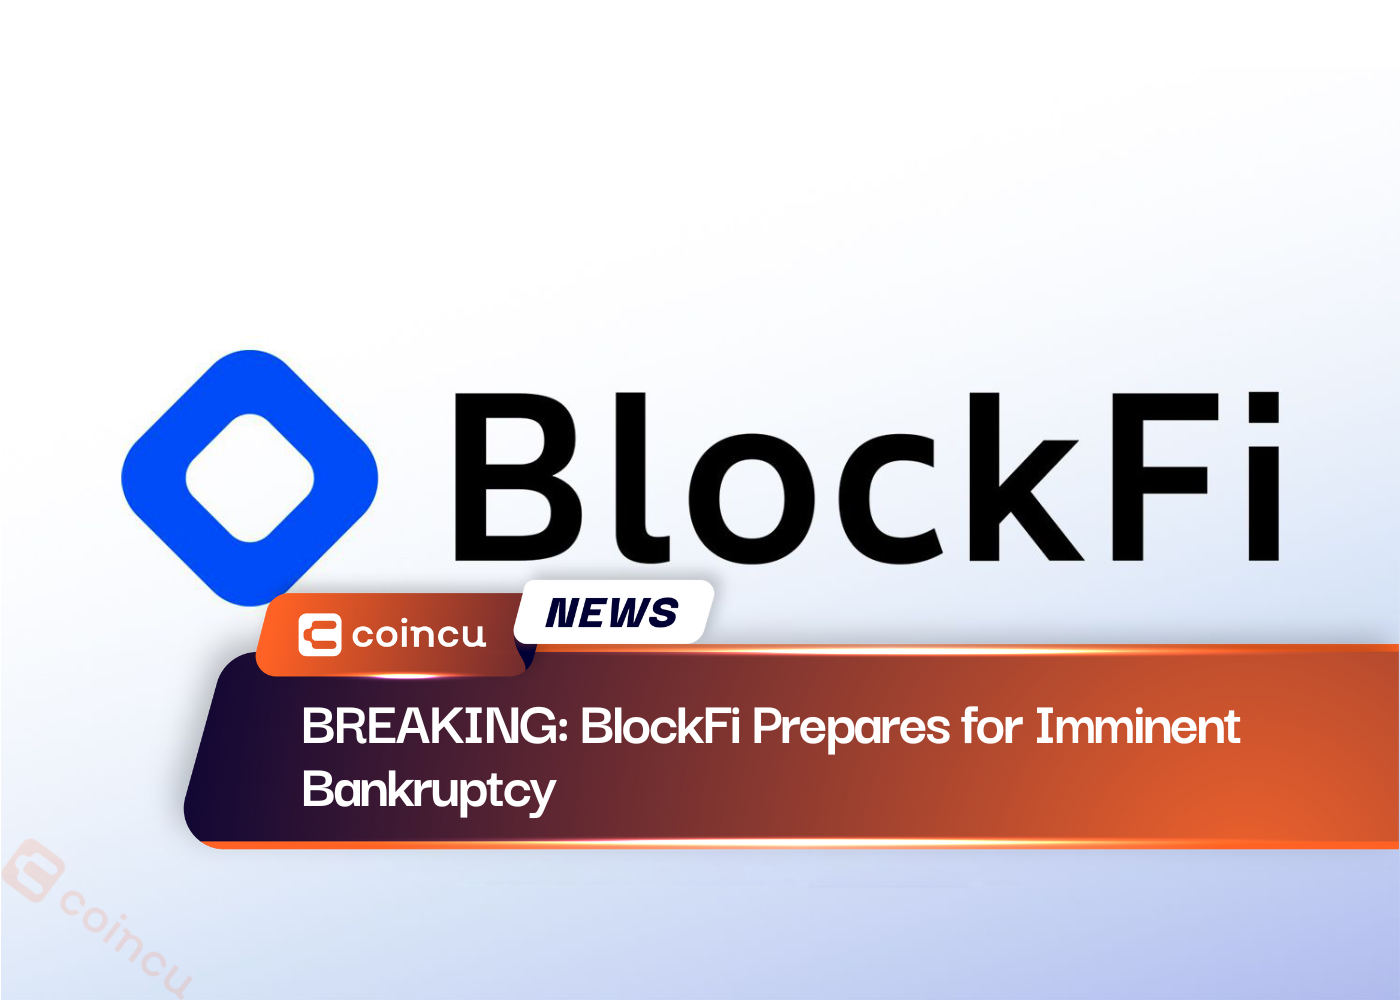 BREAKING: BlockFi Prepares for Imminent Bankruptcy